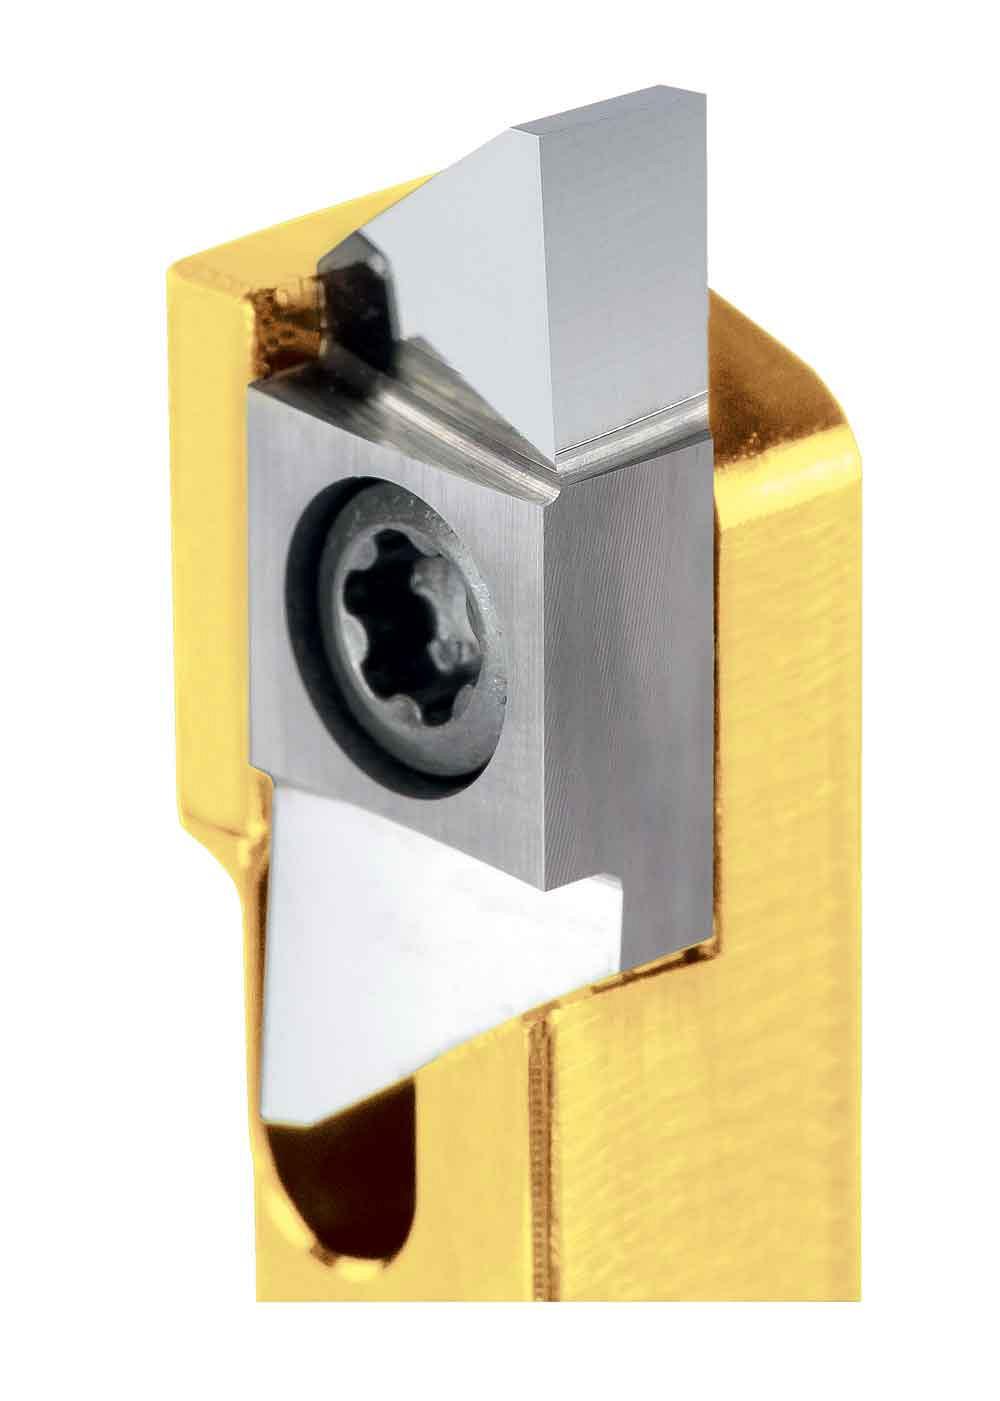 High-precision, indexable S274 tools are designed for machining small diameter bar stock. Photo courtesy of Horn USA.